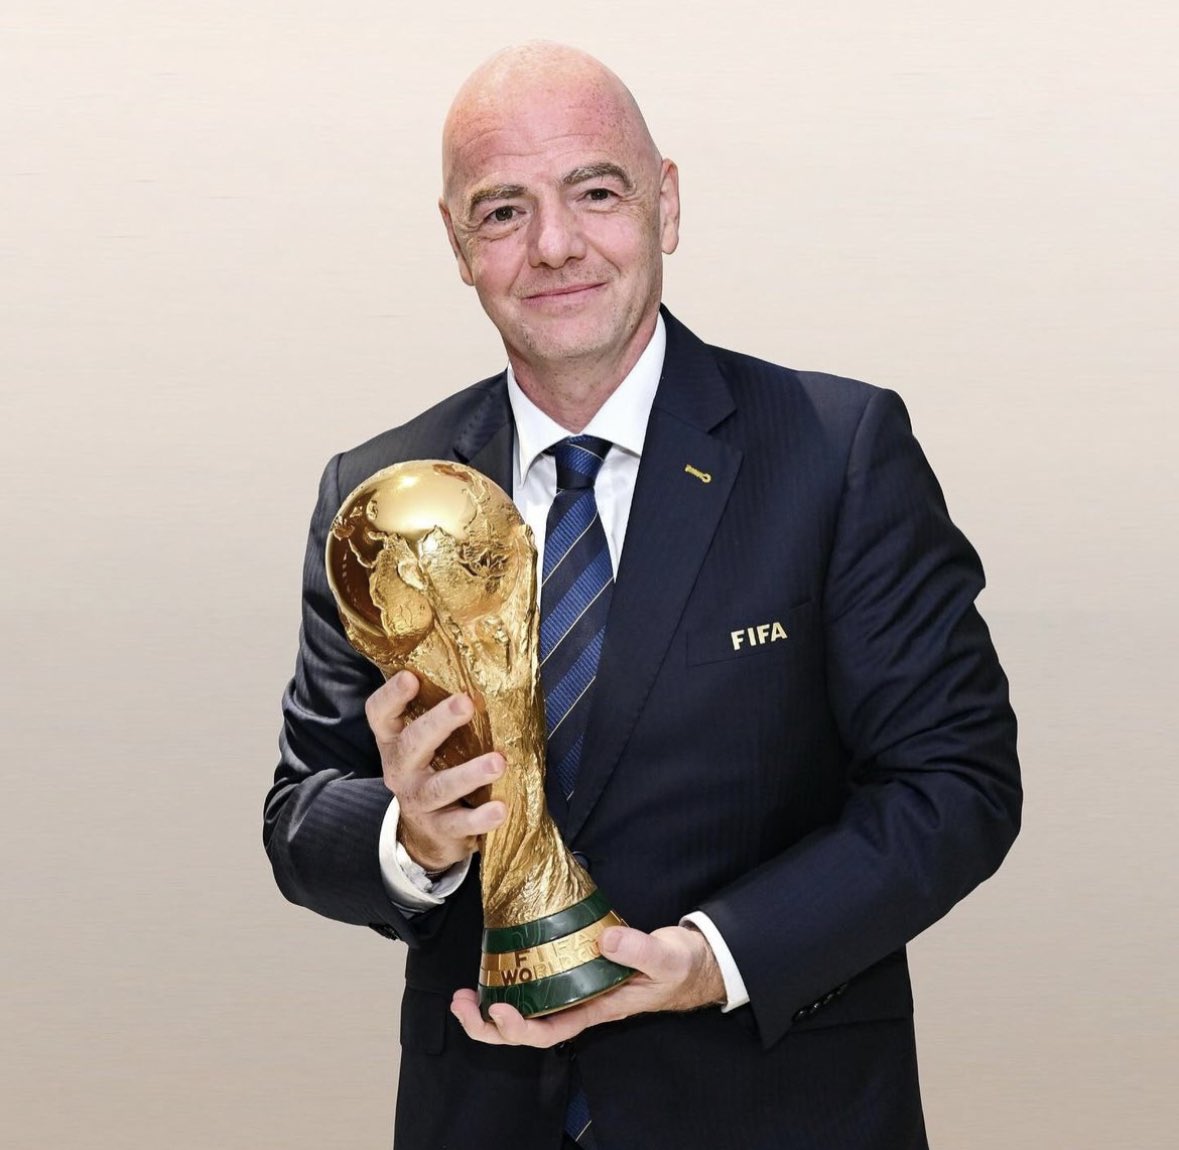 🚨🌏 OFFICIAL: World Cup 2034 will be hosted by Saudi Arabia, as president Gianni Infantino has confirmed. 🇸🇦 “Football unites the world like no other sport, World Cup is perfect showcase for a message of unity and inclusion”. “Different cultures can be together”.